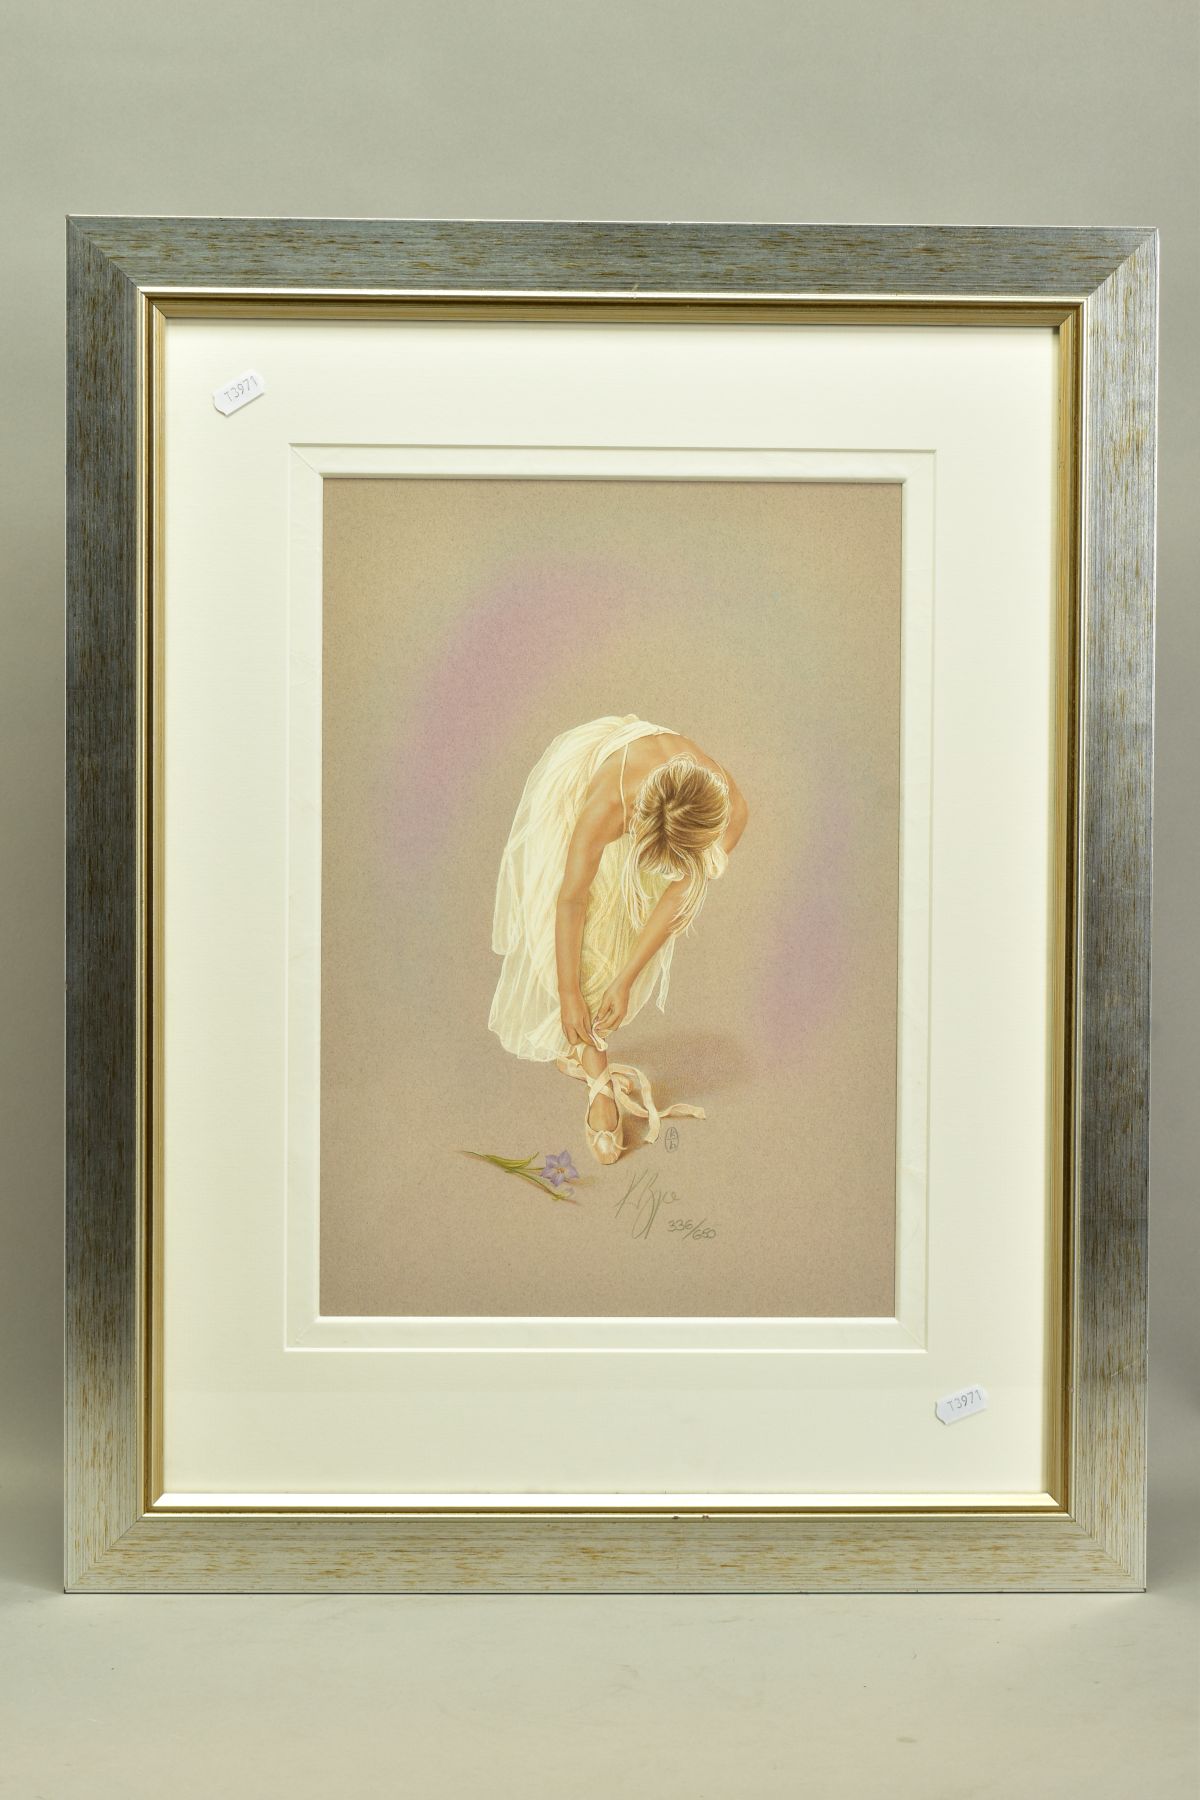 KAY BOYCE (BRITISH CONTEMPORARY) 'BALLET SLIPPERS', a signed limited edition print of a female